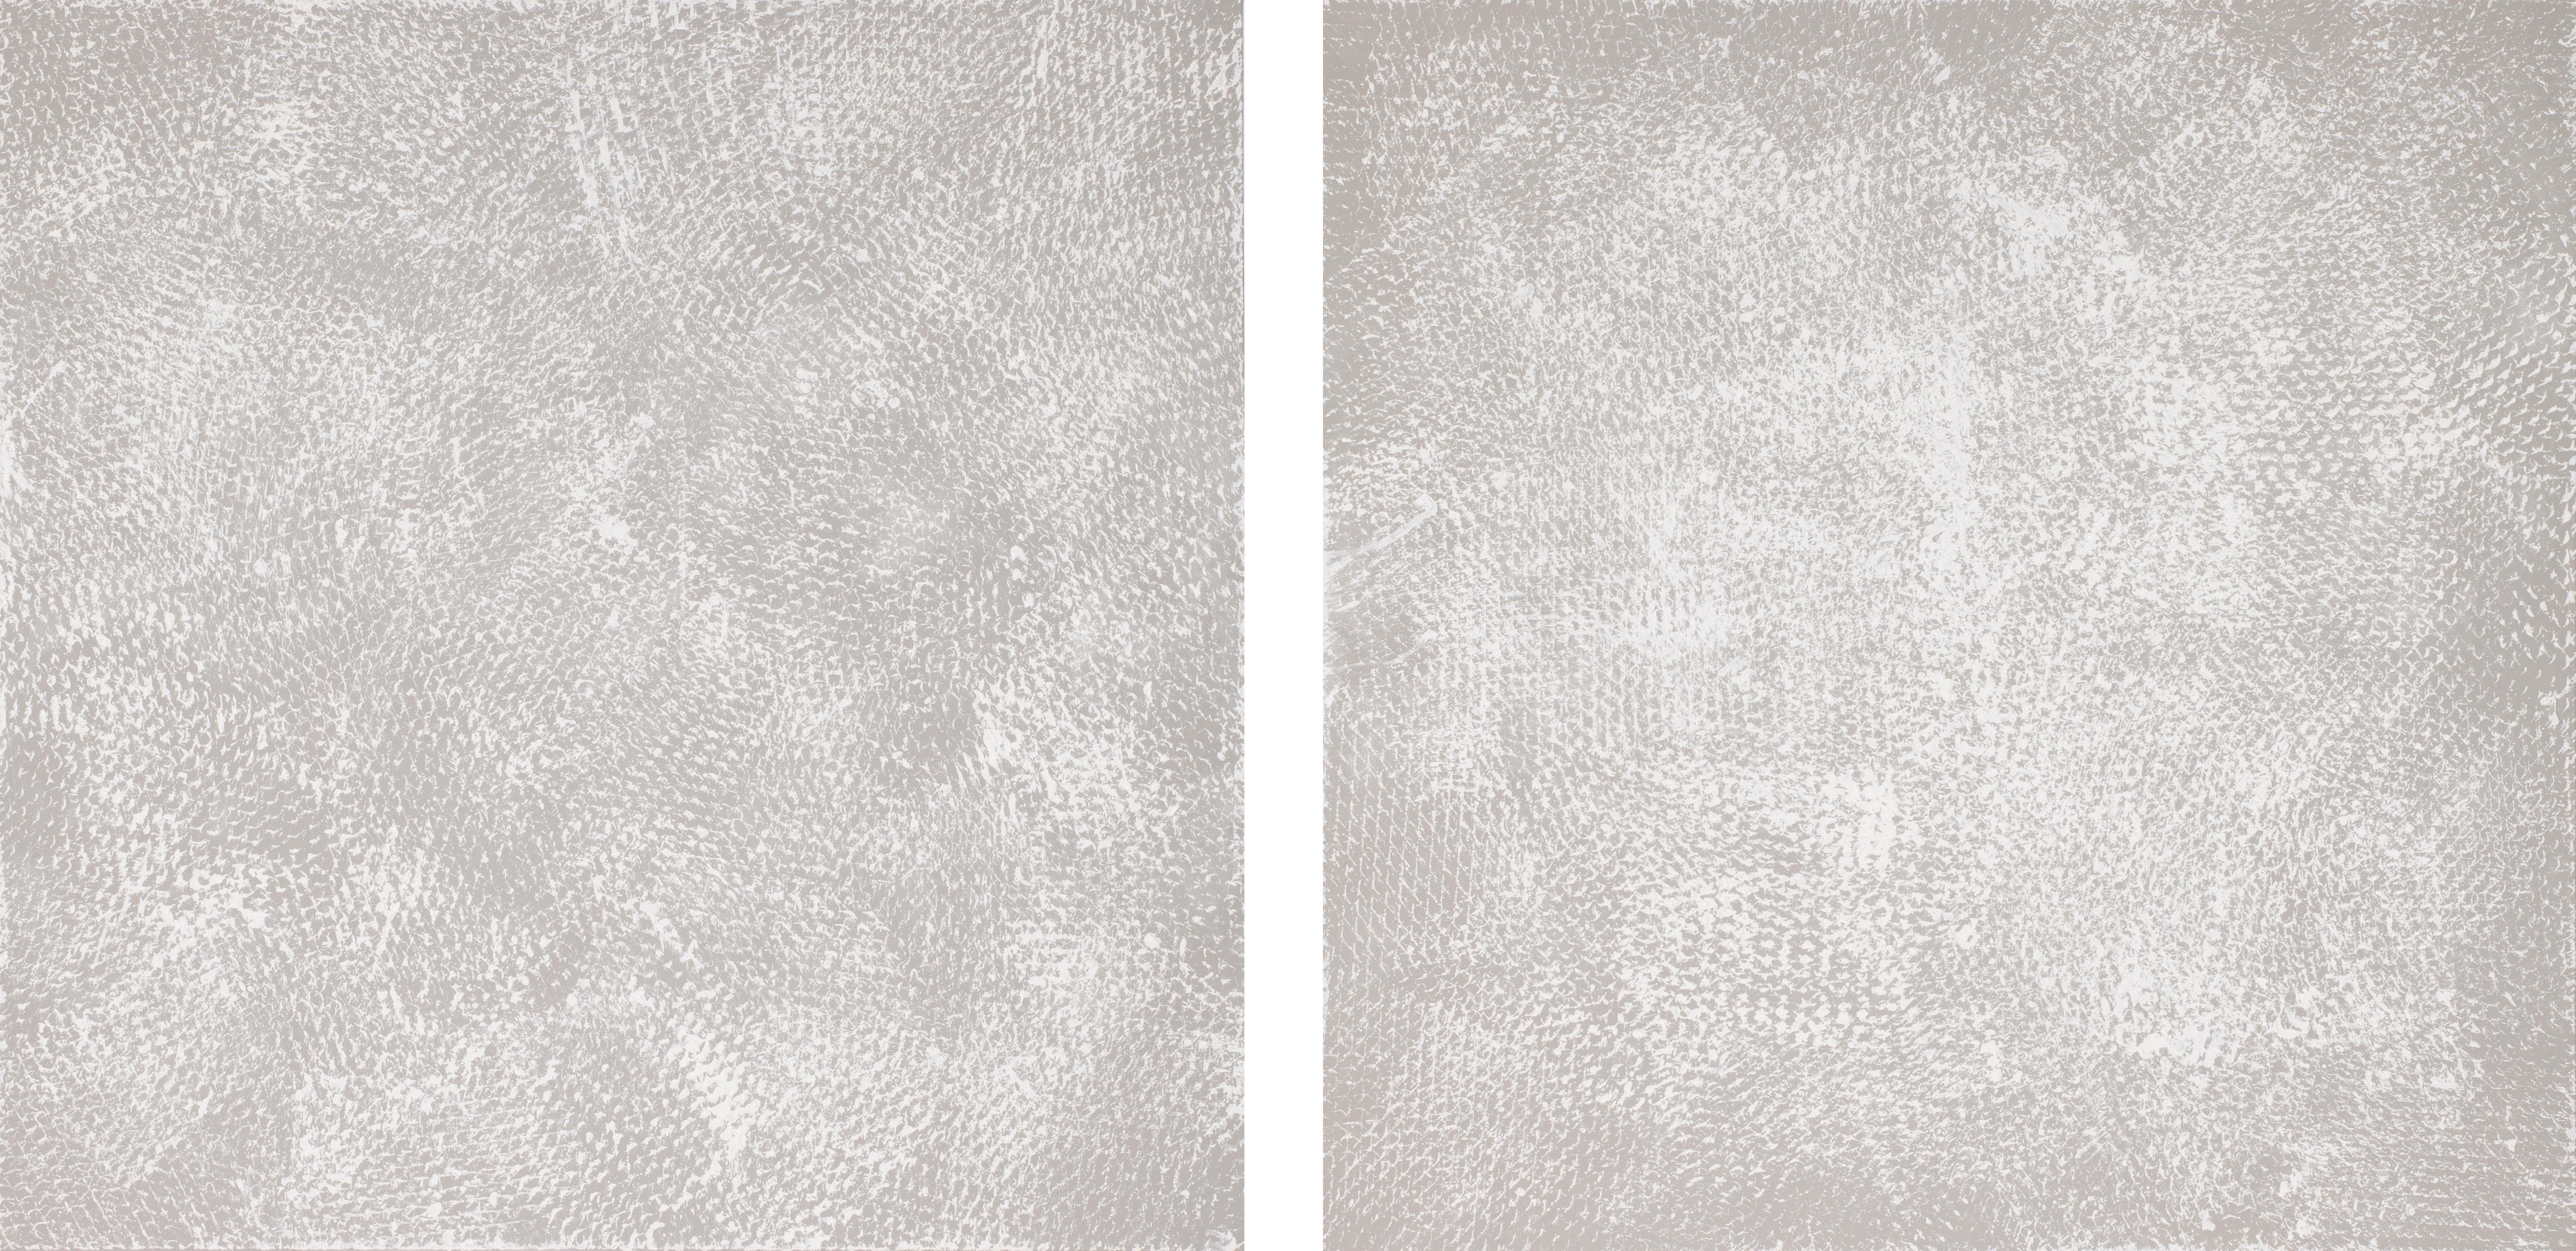 Greyn and White I and II, Expanded Metal Painting. Diptych